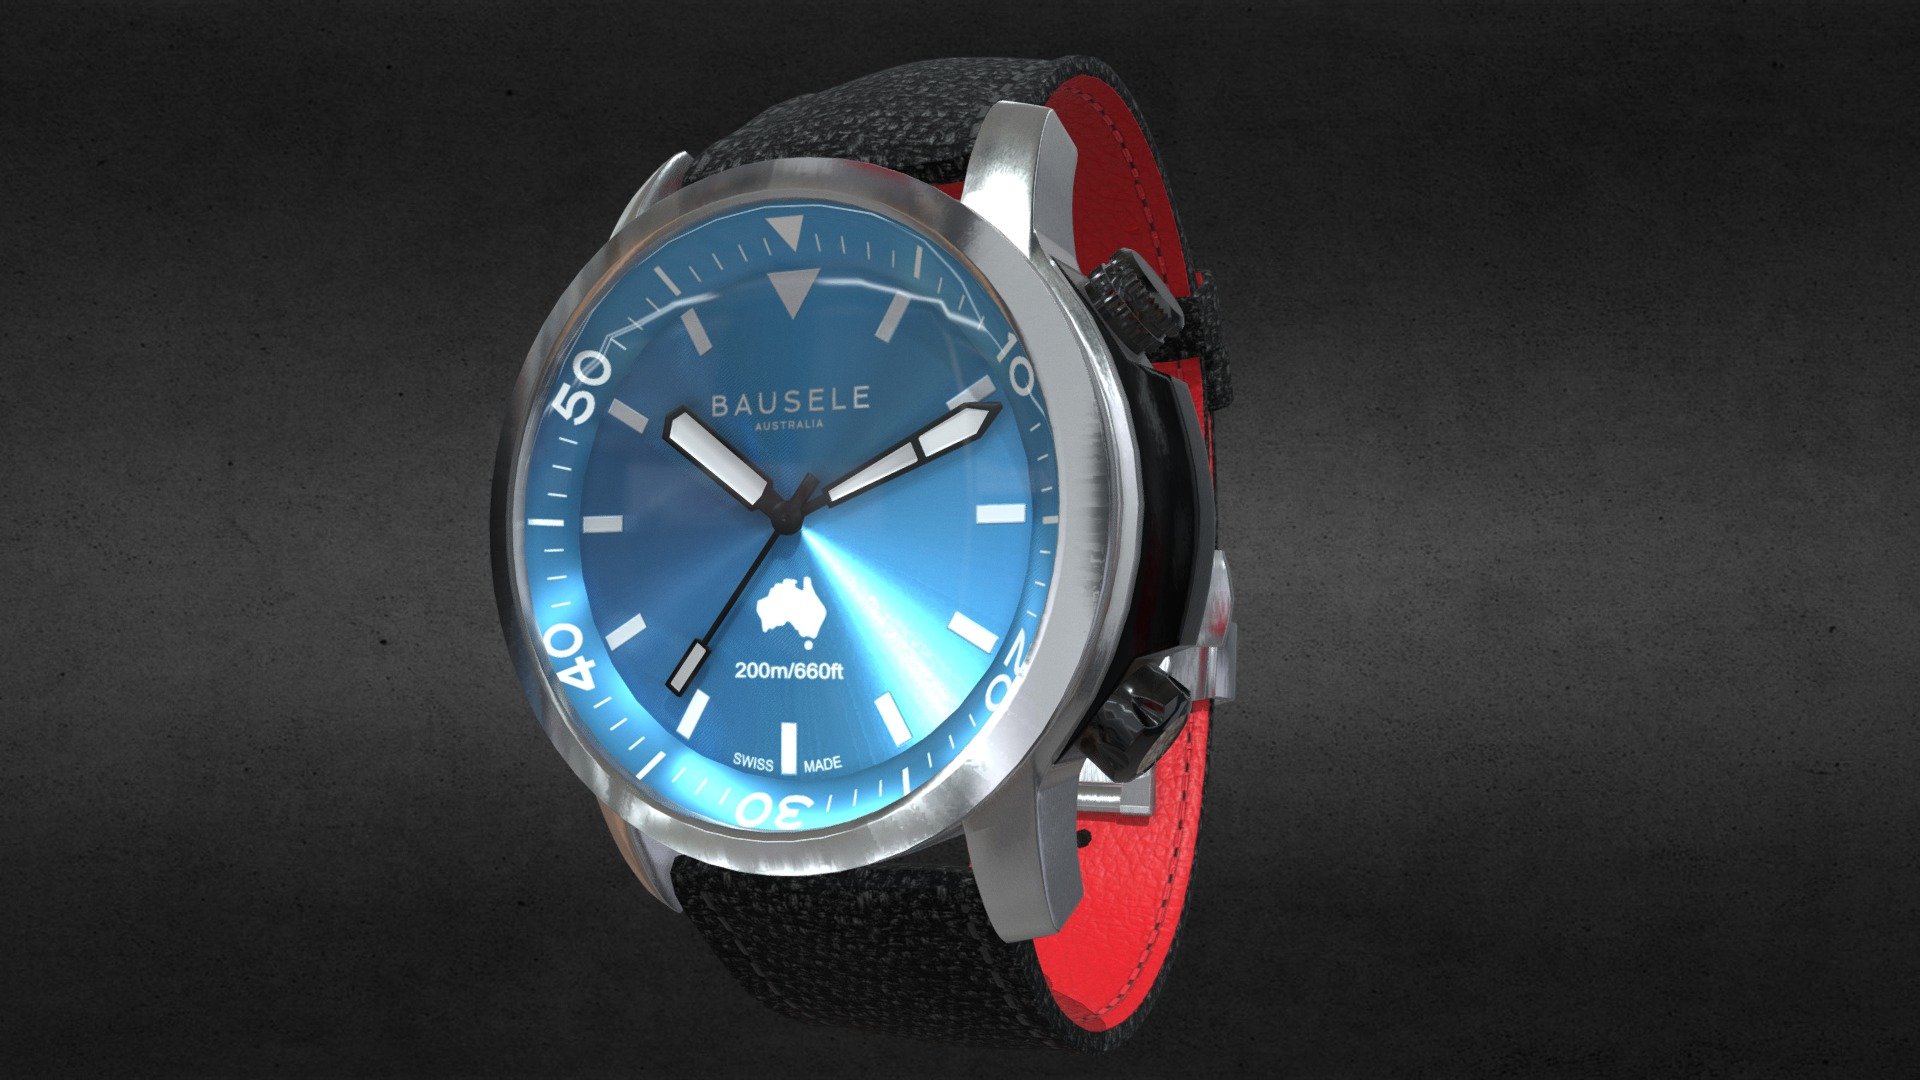 Awesome stainless steel Bausele AWF Oceanmoon Watch․
Use for Unreal Engine 4 and Unity3D. Try in augmented reality in the AR-Watches app. 
Links to the app: Android, iOS

Currently available for download in FBX format.

3D model developed by AR-Watches

Disclaimer: We do not own the design of the watch, we only made the 3D model 3d model